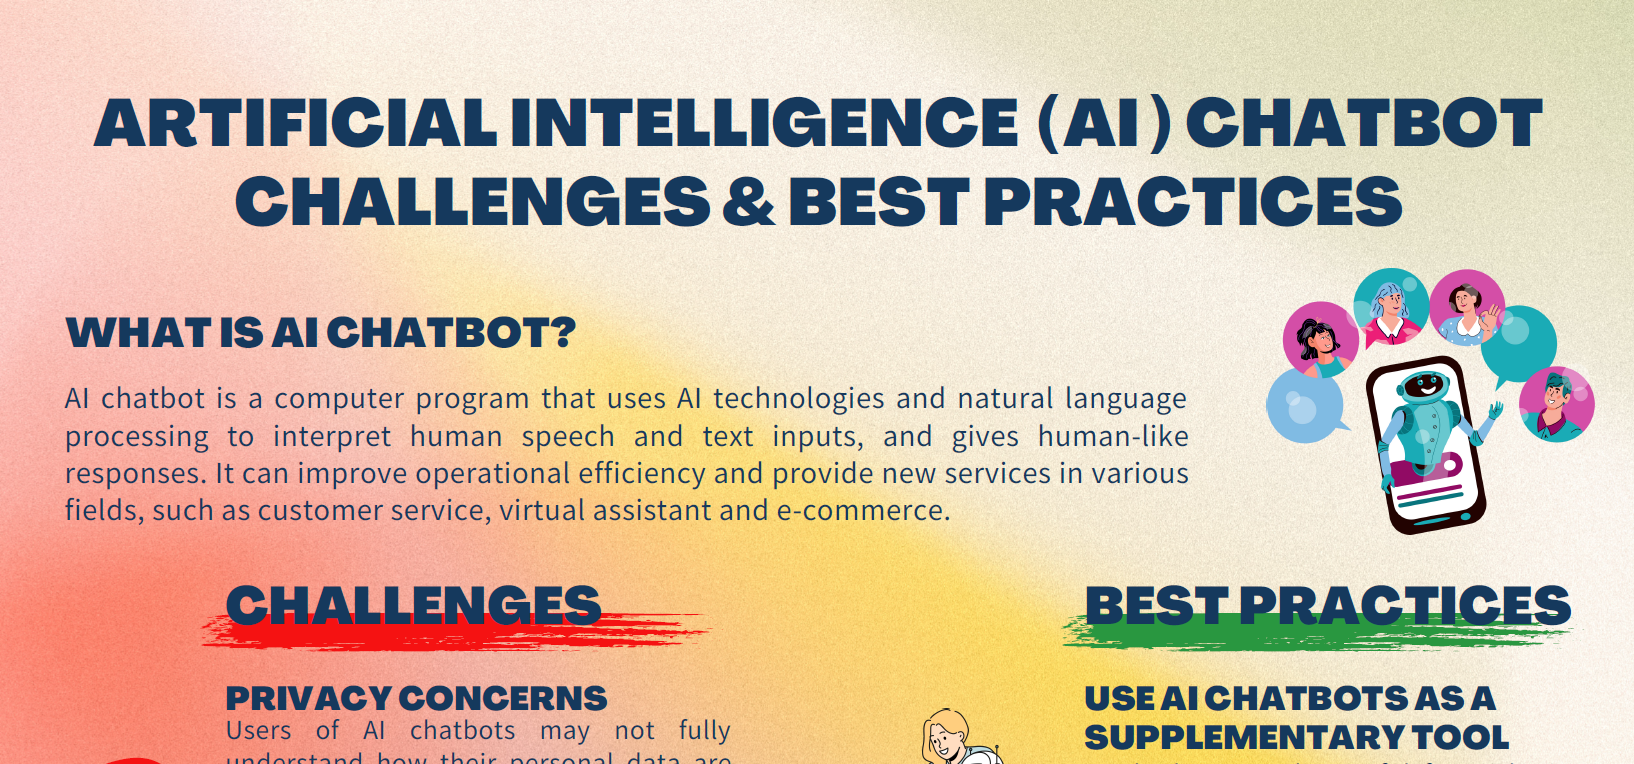 ARTIFICIAL INTELLIGENCE (AI) CHATBOT CHALLENGES BEST PRACTICES